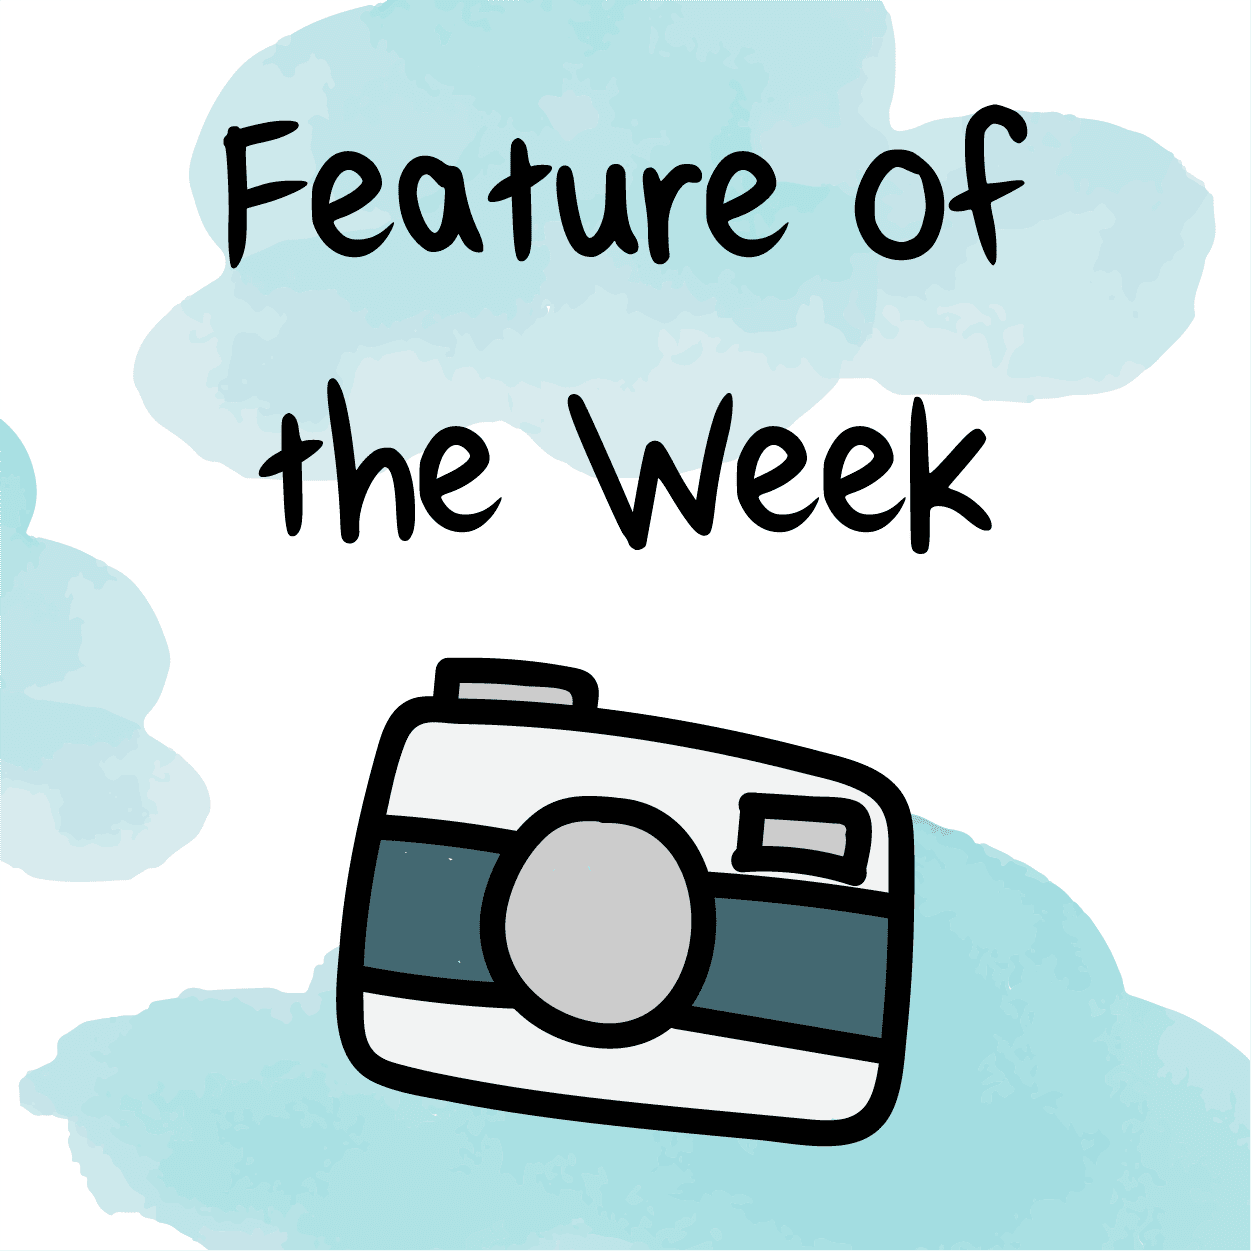 Feature of the Week